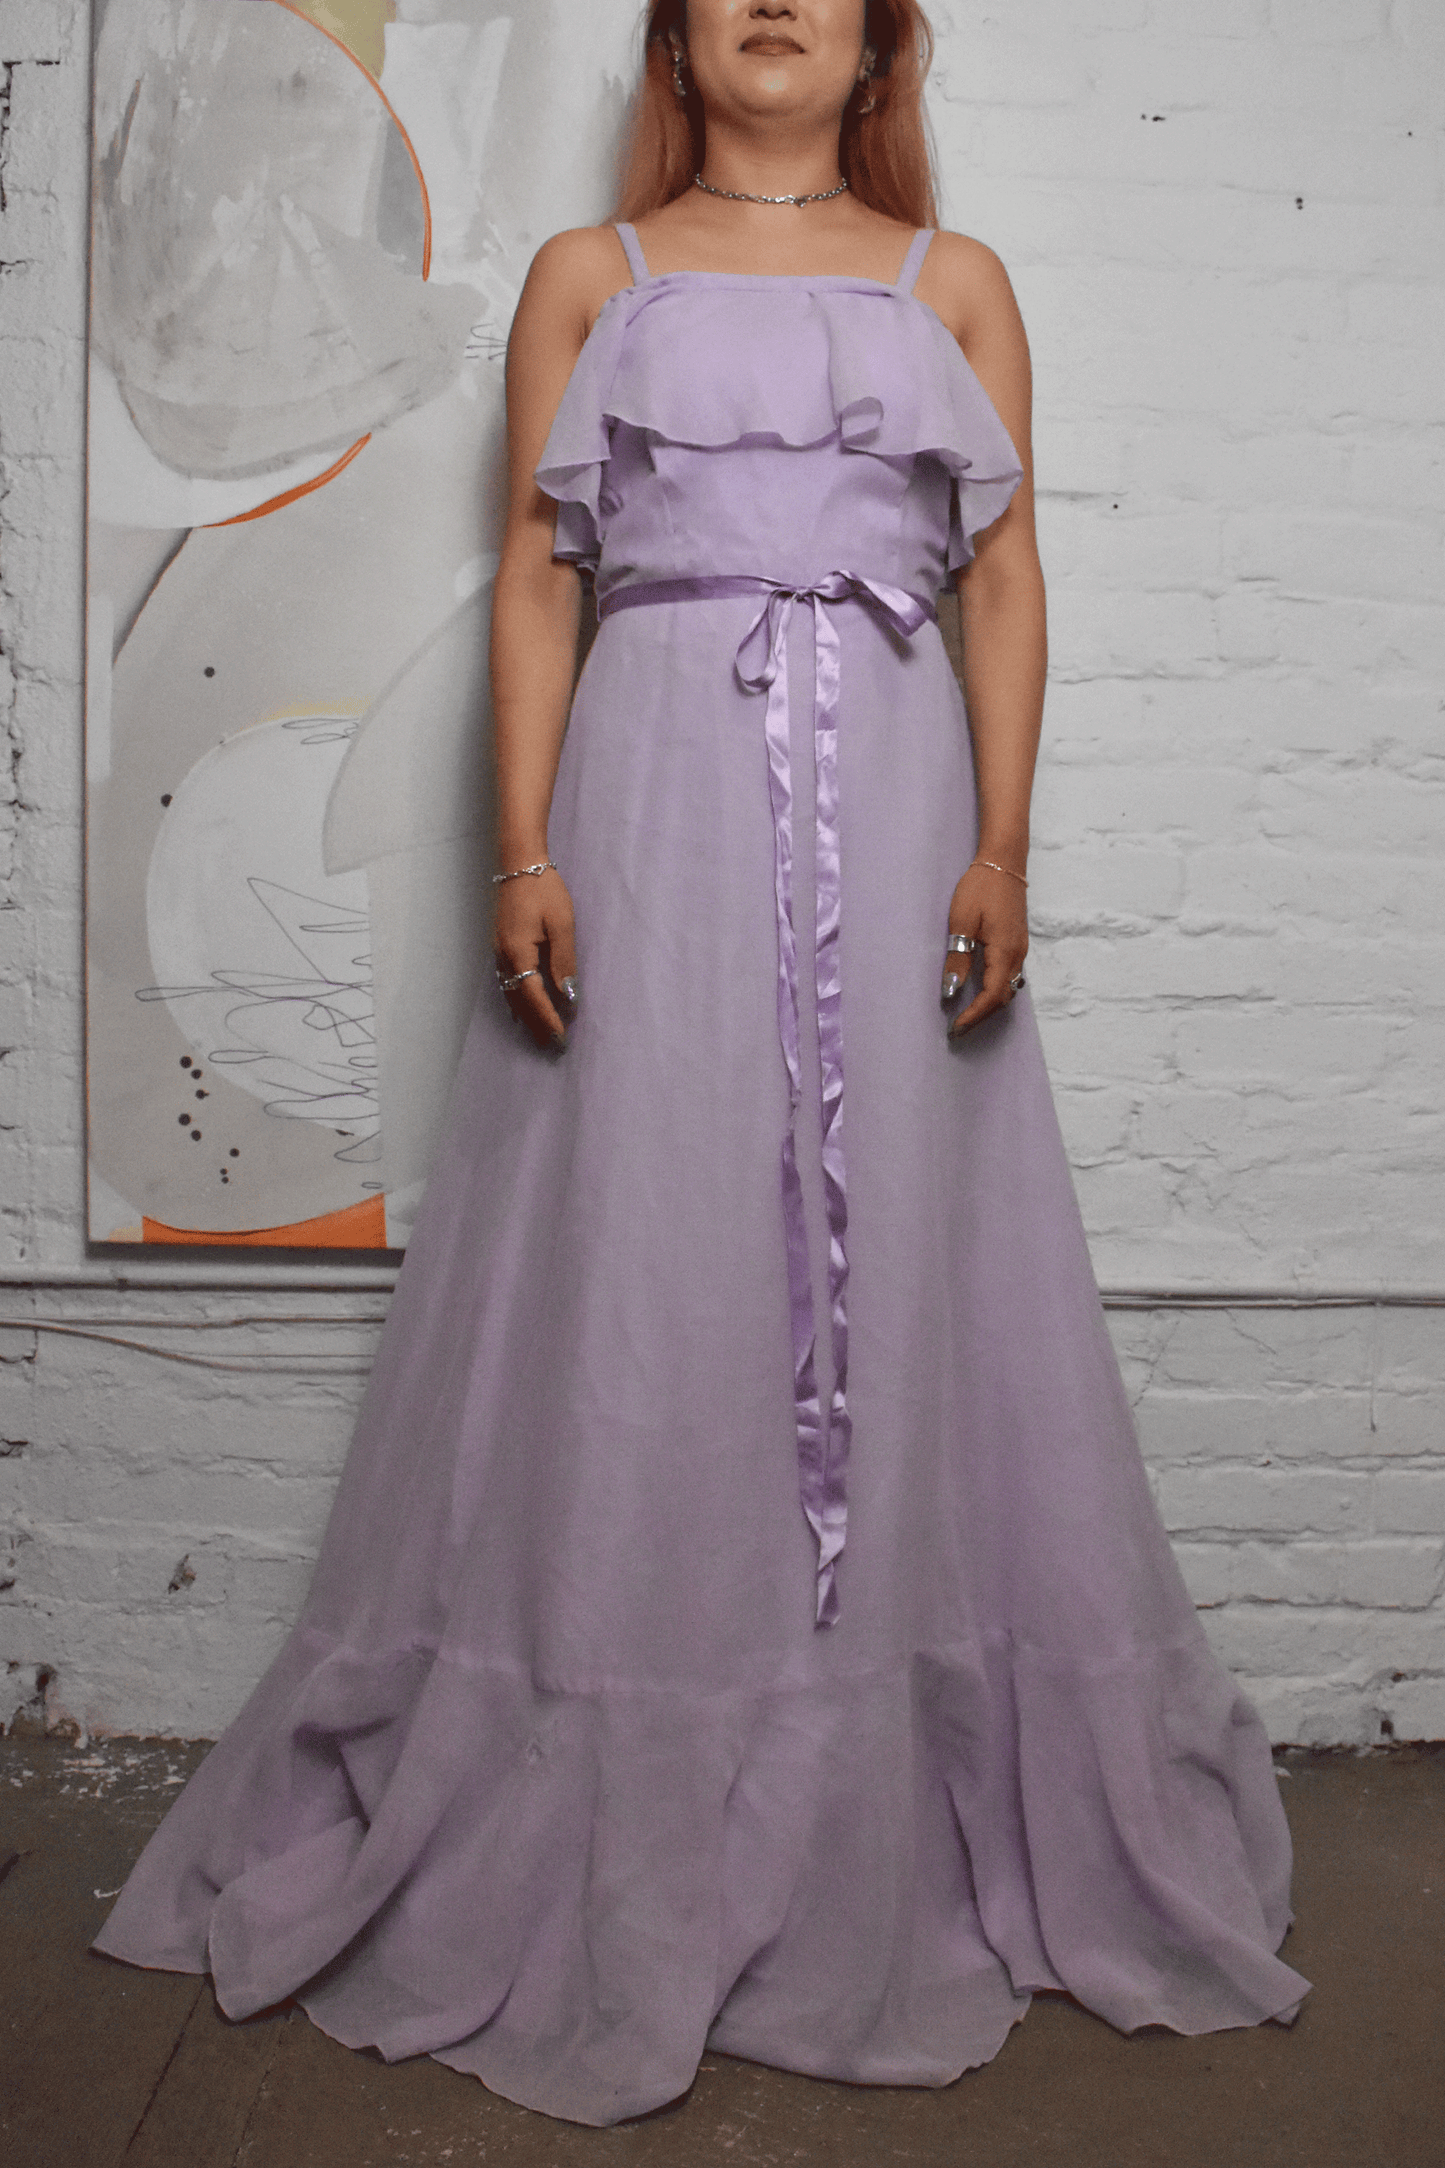 Vintage 1970s "JC Penney Fashion" Lavender Tiered Ruffle Gown